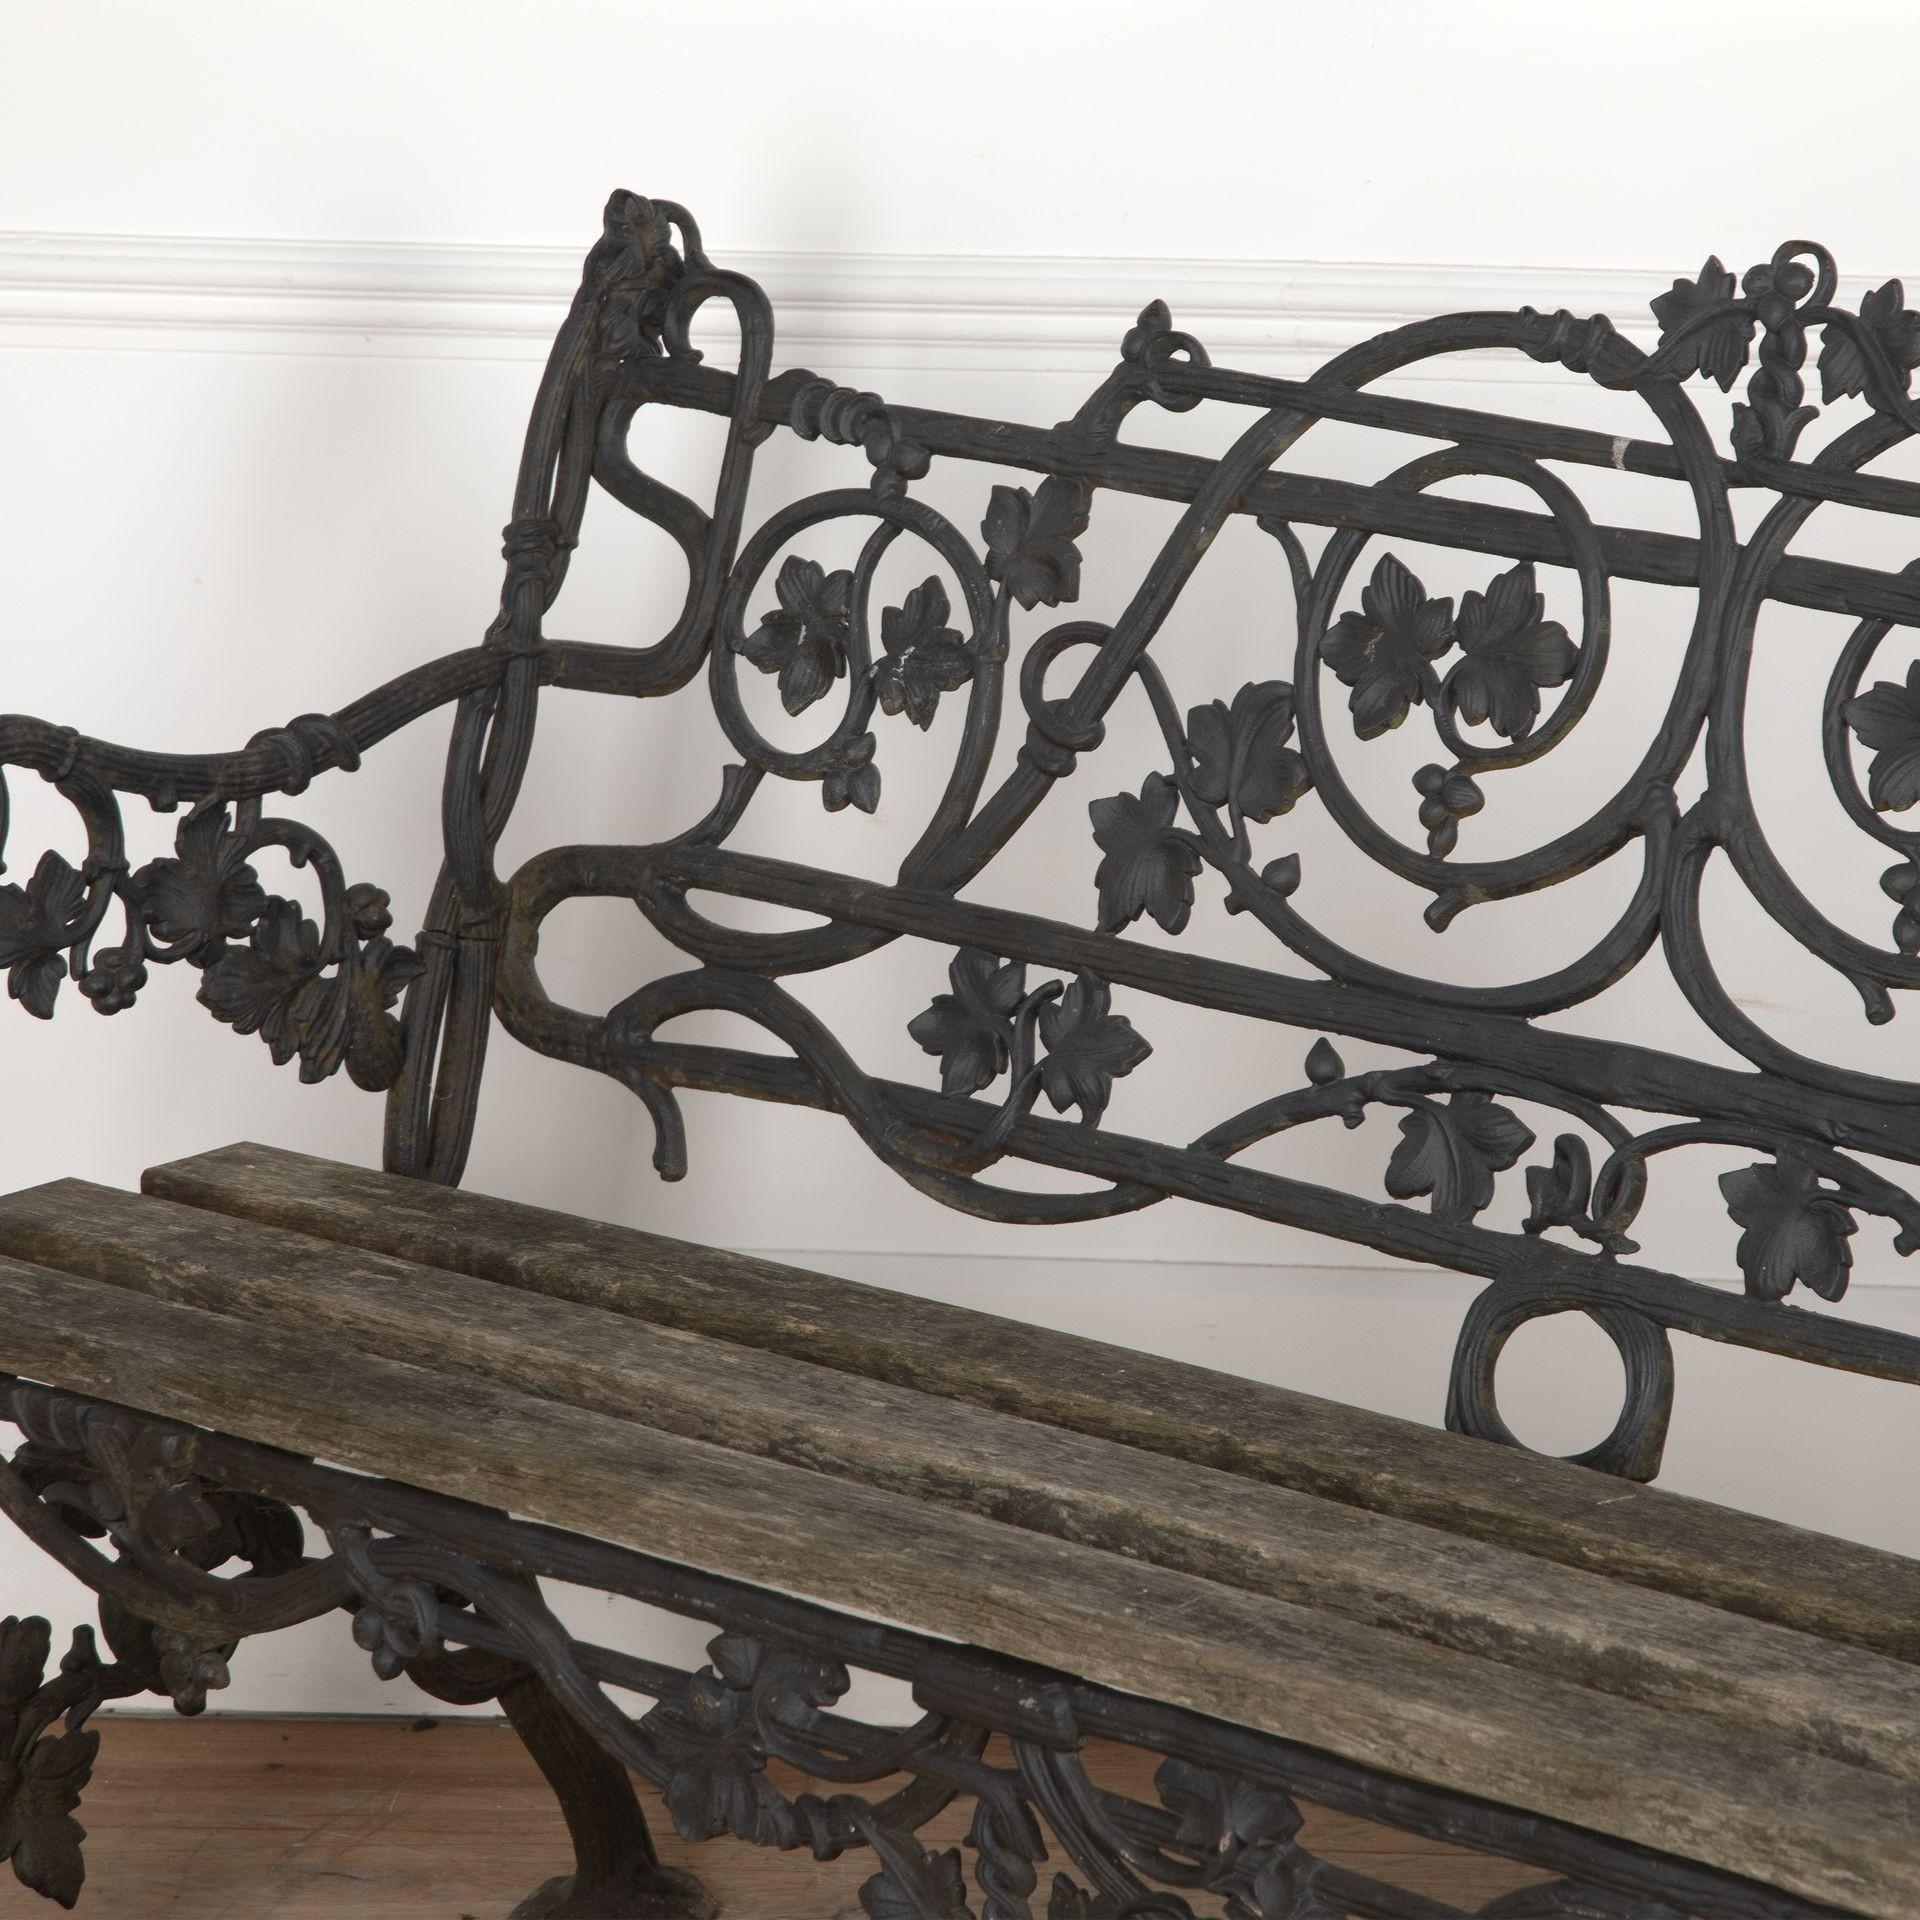 19th century Coalbrookdale ivy leaf motif cast iron garden bench, with slatted wood seat.